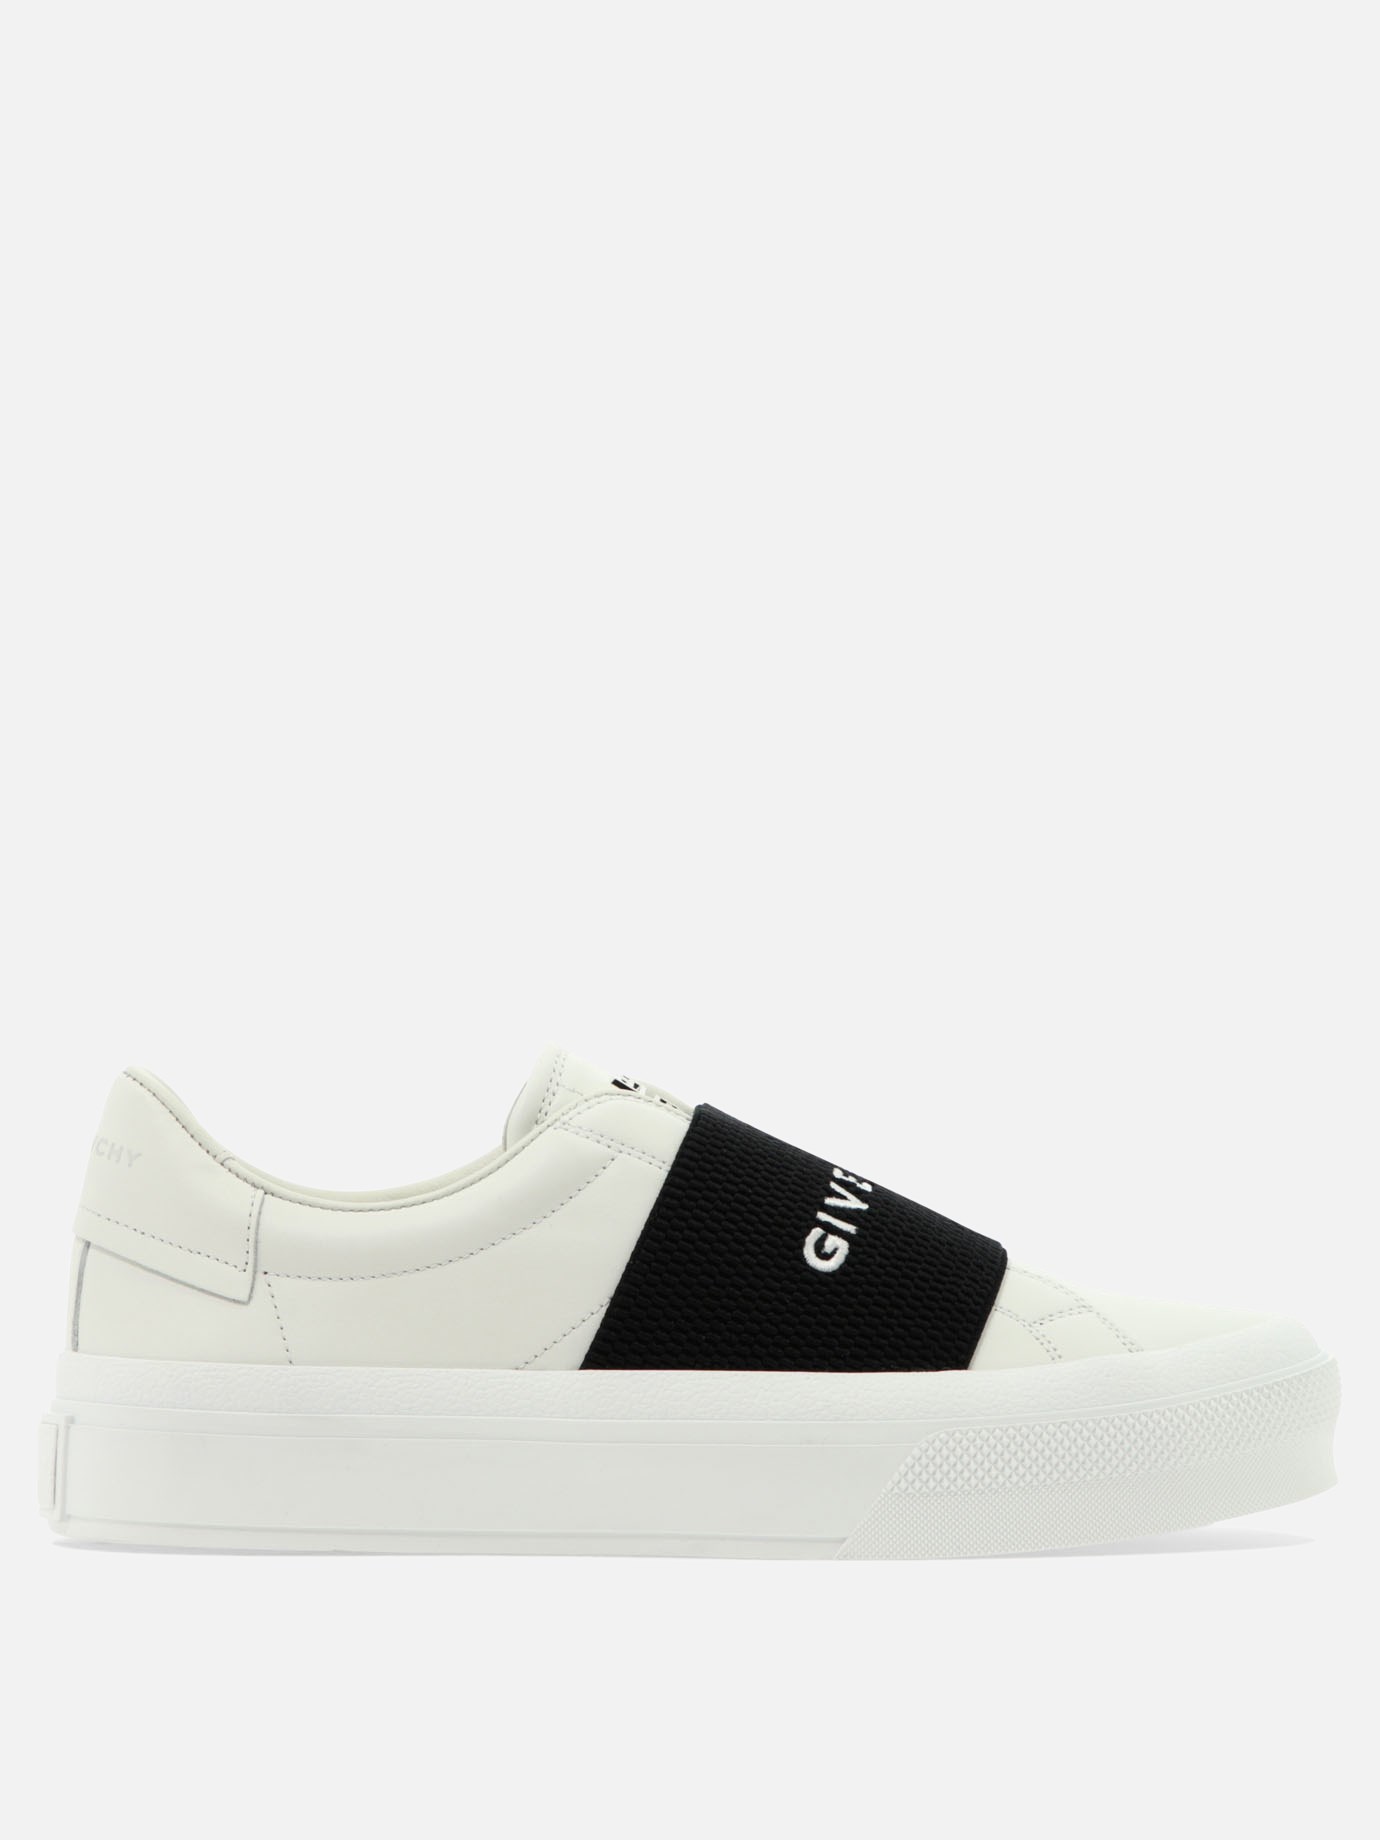  City Sport  sneakersby Givenchy - 3